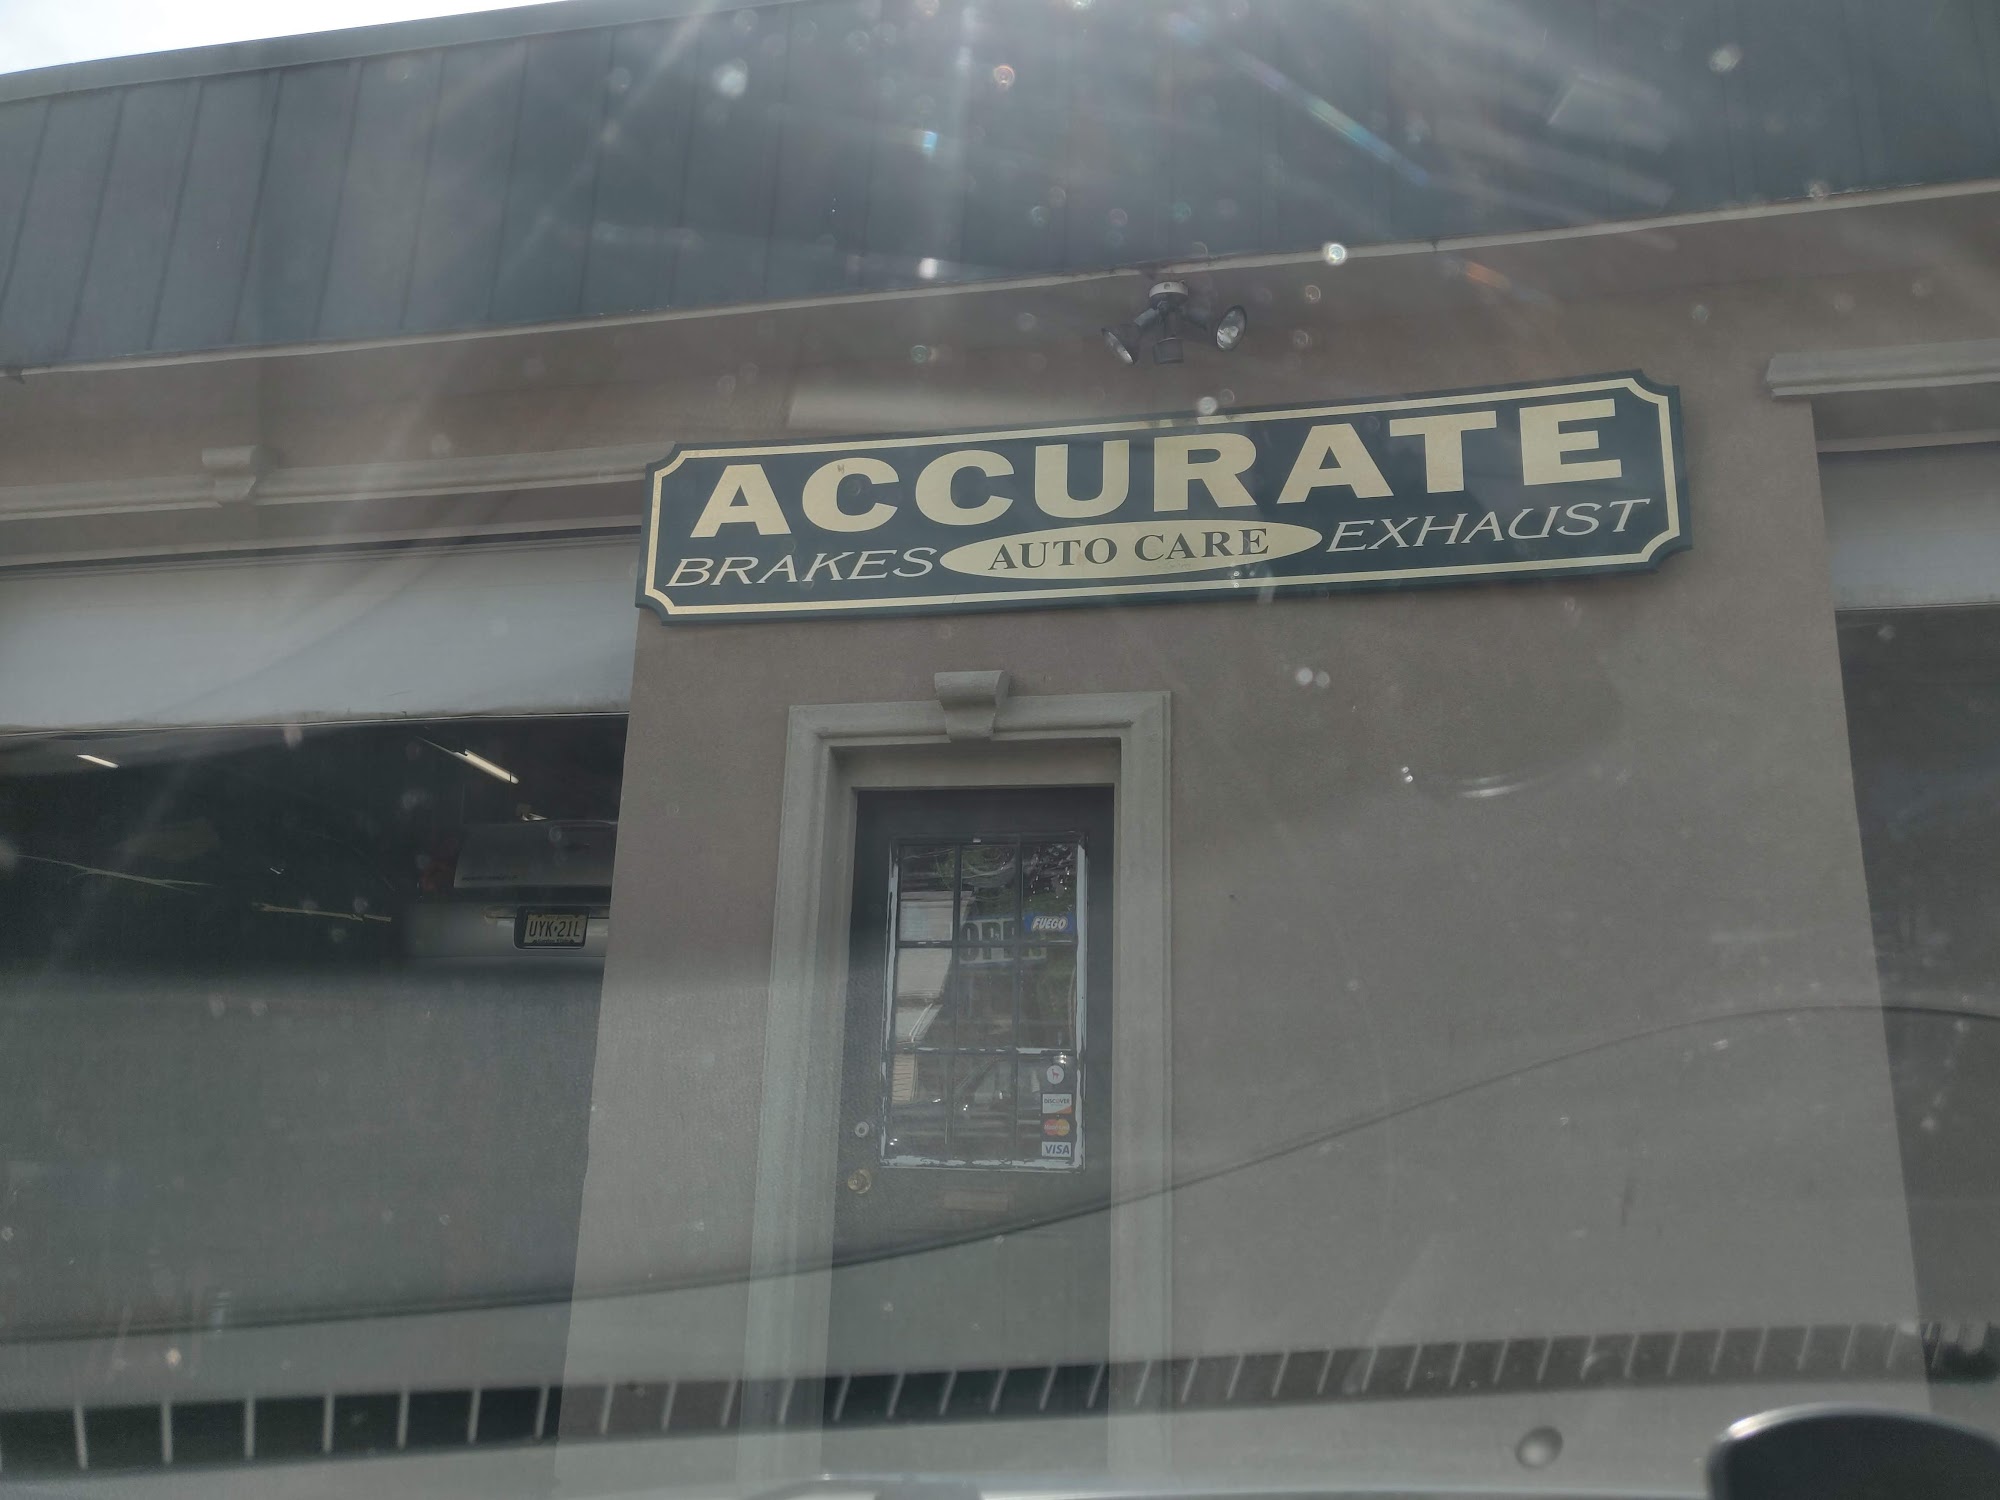 Accurate Auto Care 1185 Ringwood Ave, Haskell New Jersey 07420